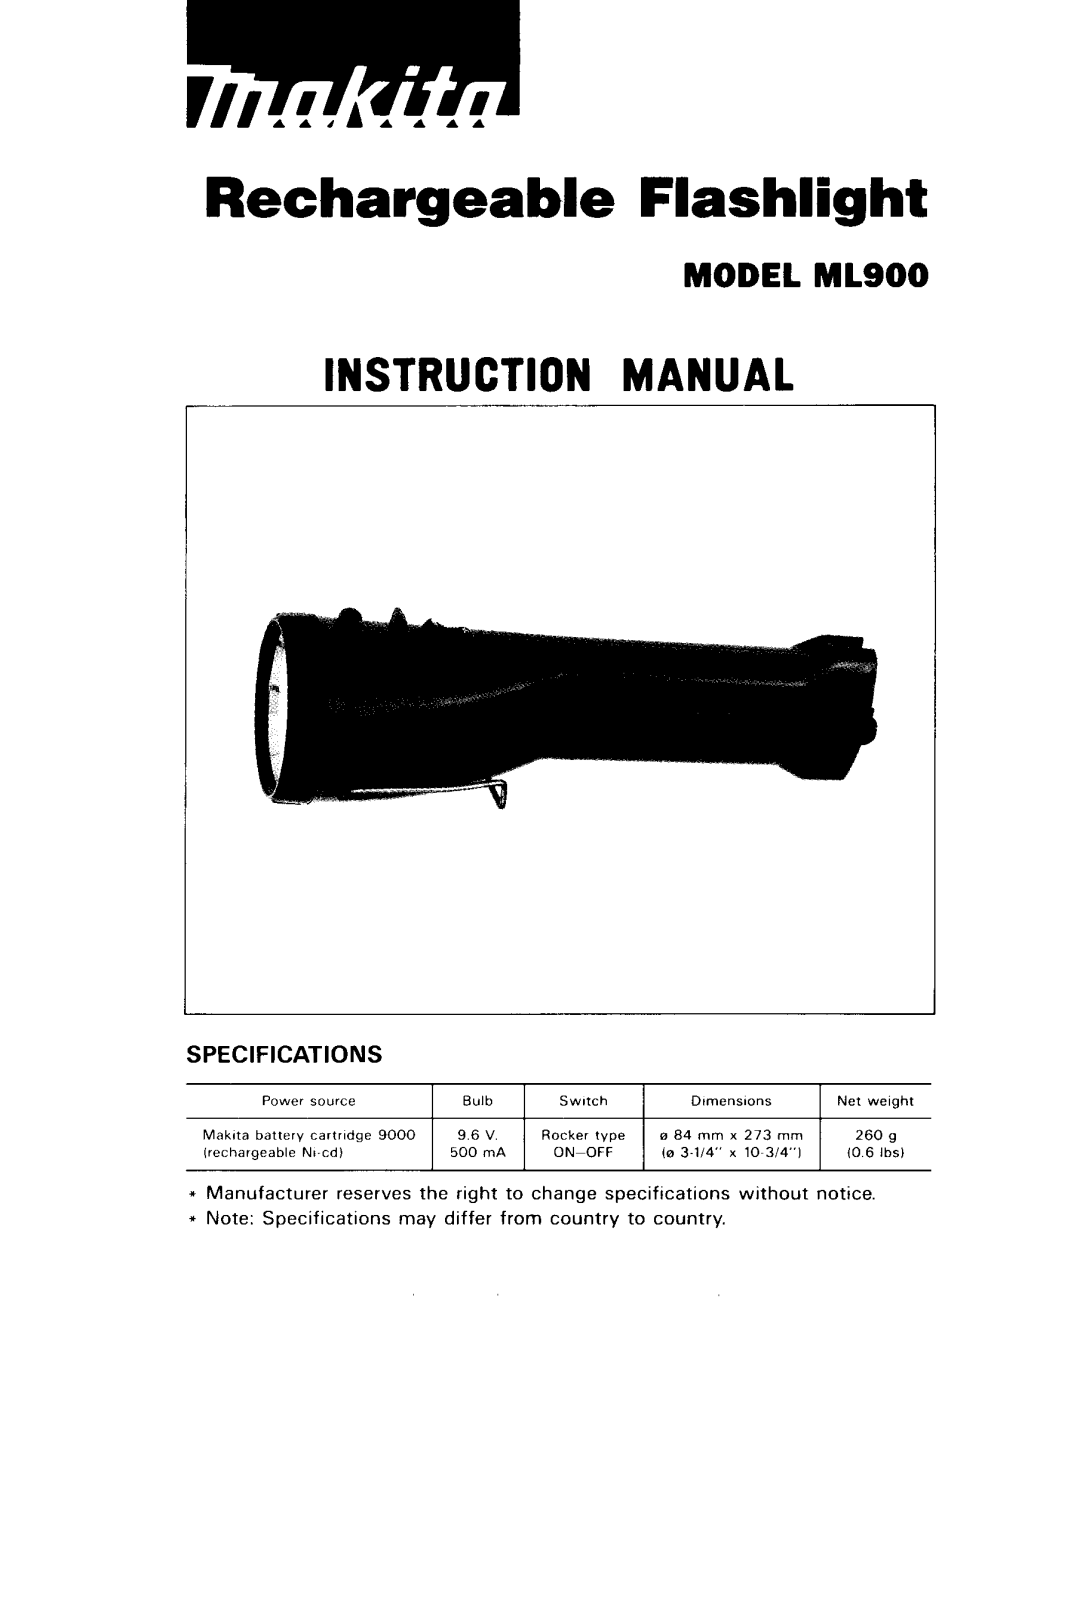 Makita instruction manual Rechargeable Flashlight, MODEL ML900, 0 84 m m x 273 mm, 260 g, 500 mA, On-Off, Power source 